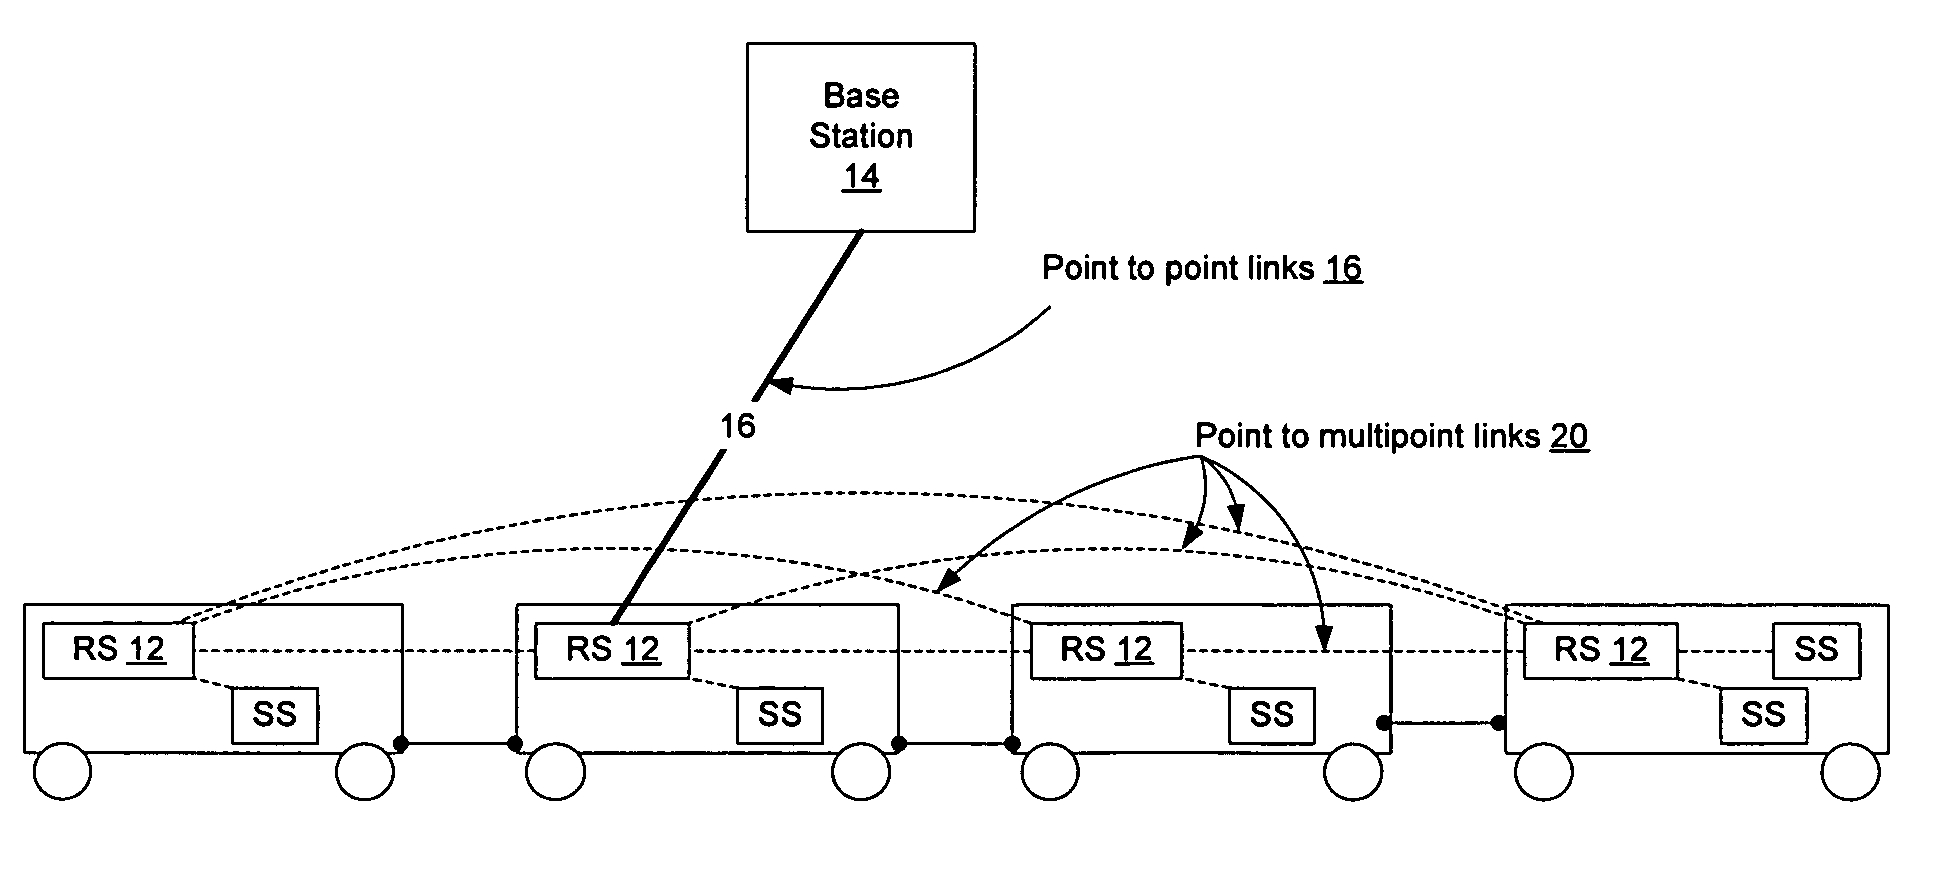 Network element for implementing scheduled high-power PTP and low-power PTMP transmissions